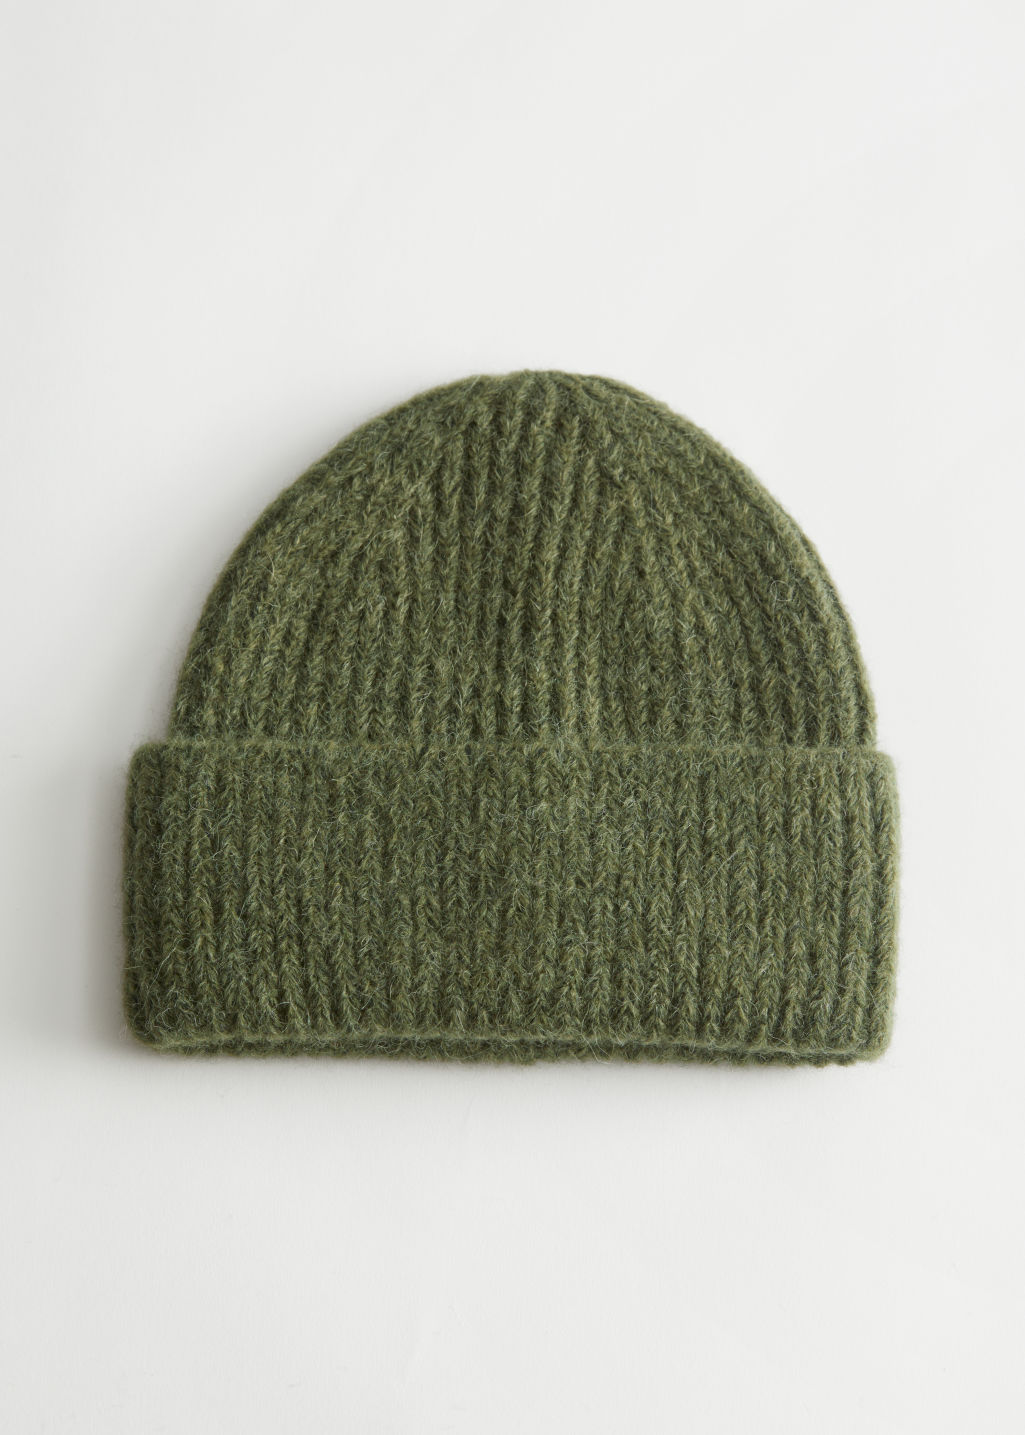 Ribbed Knit Beanie Hat - Green - Beanies - & Other Stories